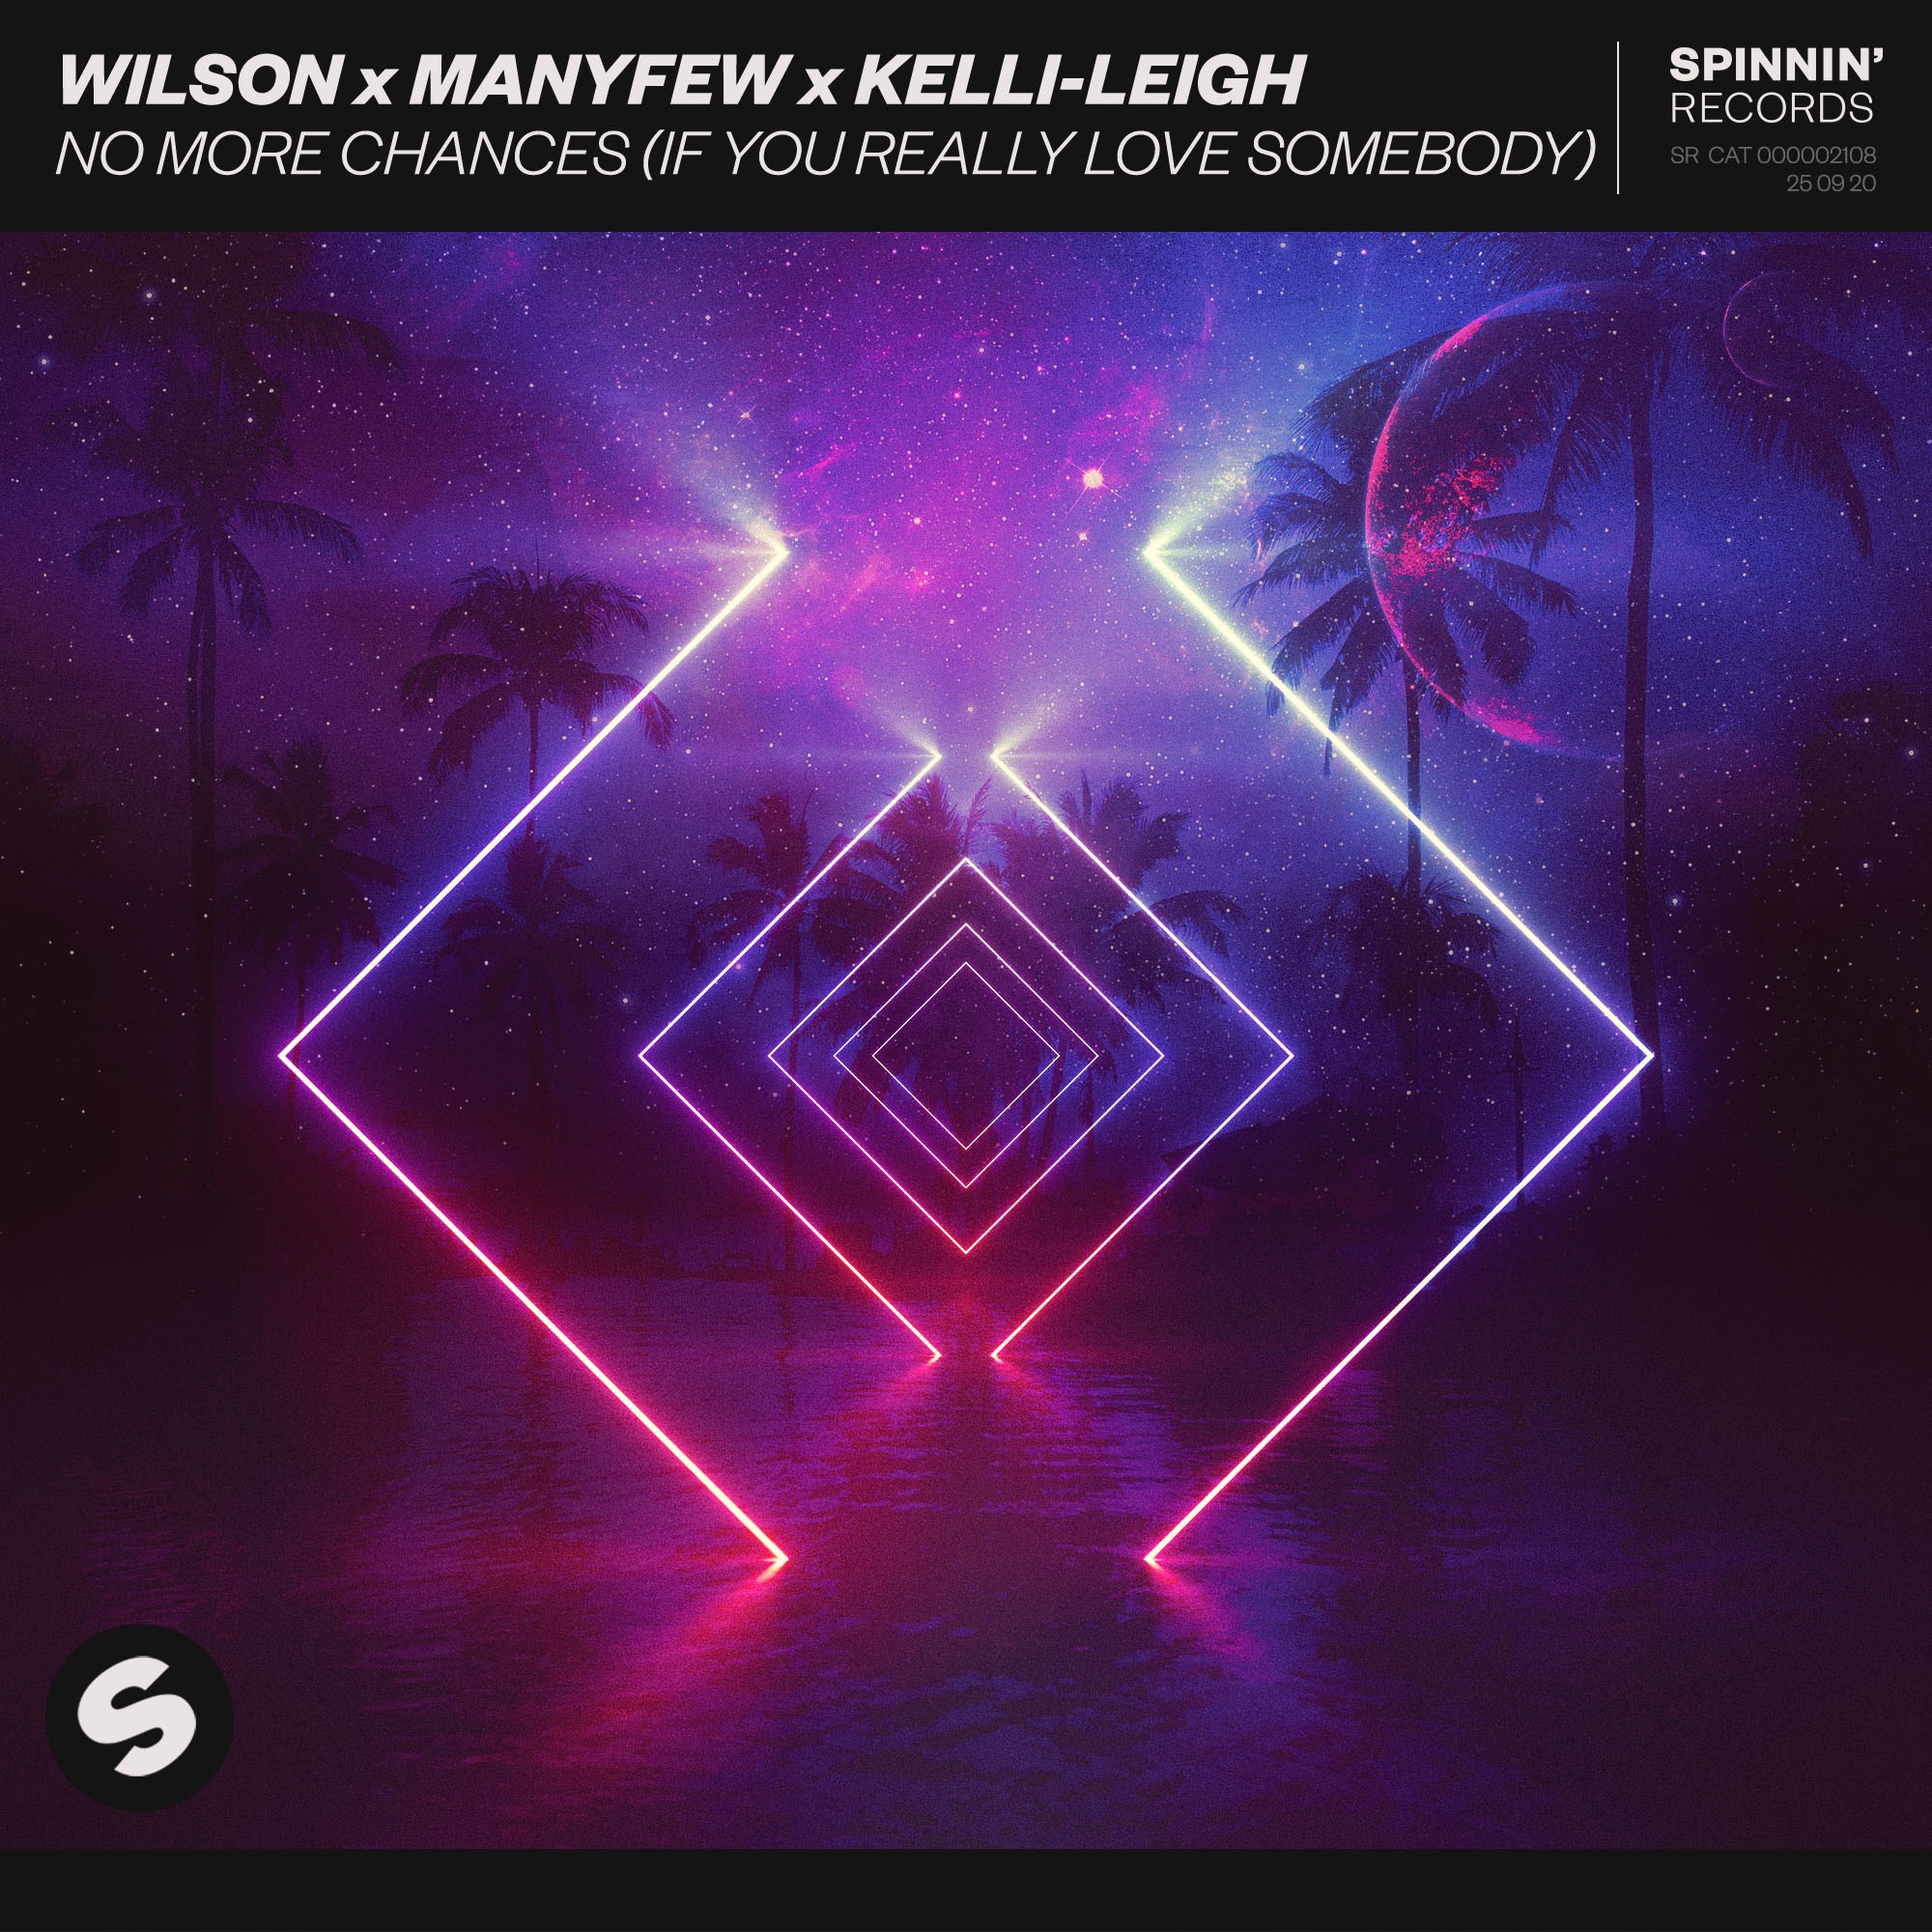 Wilson, ManyFew & Kelli-Leigh - No More Chances (If You Really Love Somebody) - Single